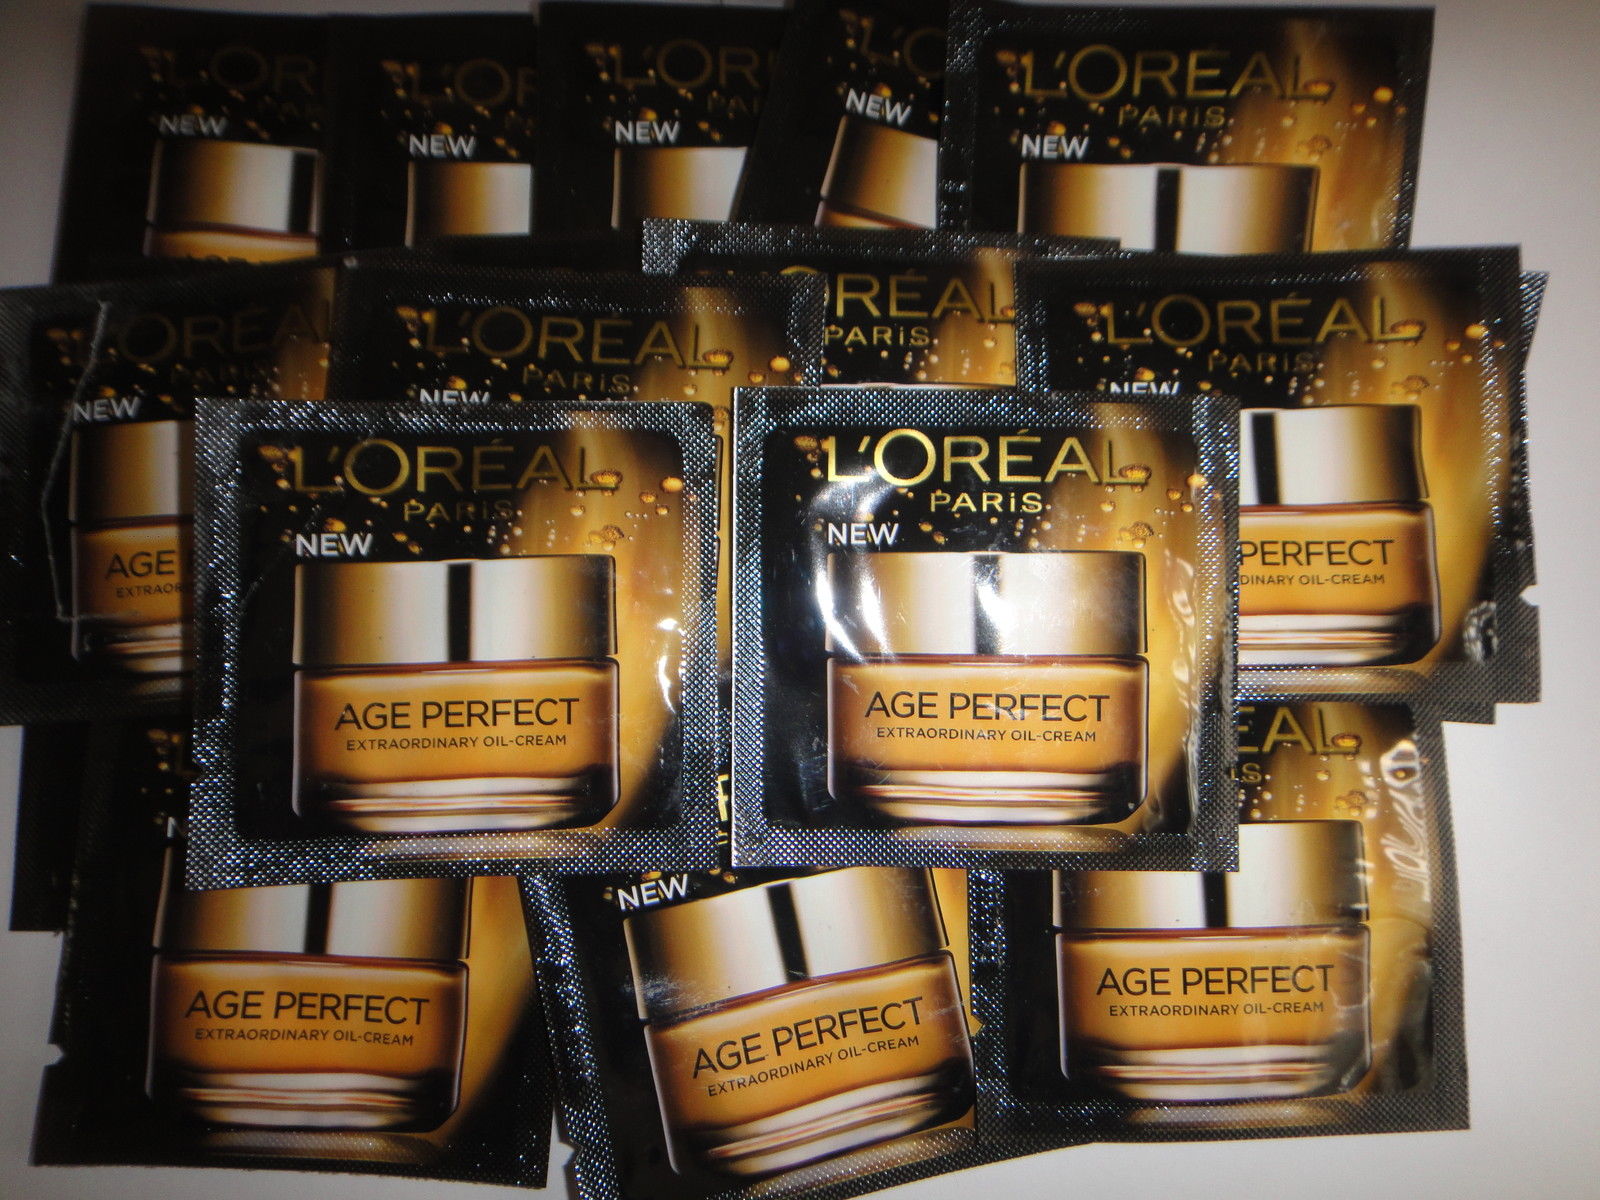 LOreal-New-Age-Perfect-Extraordinary-oil-cream-samples